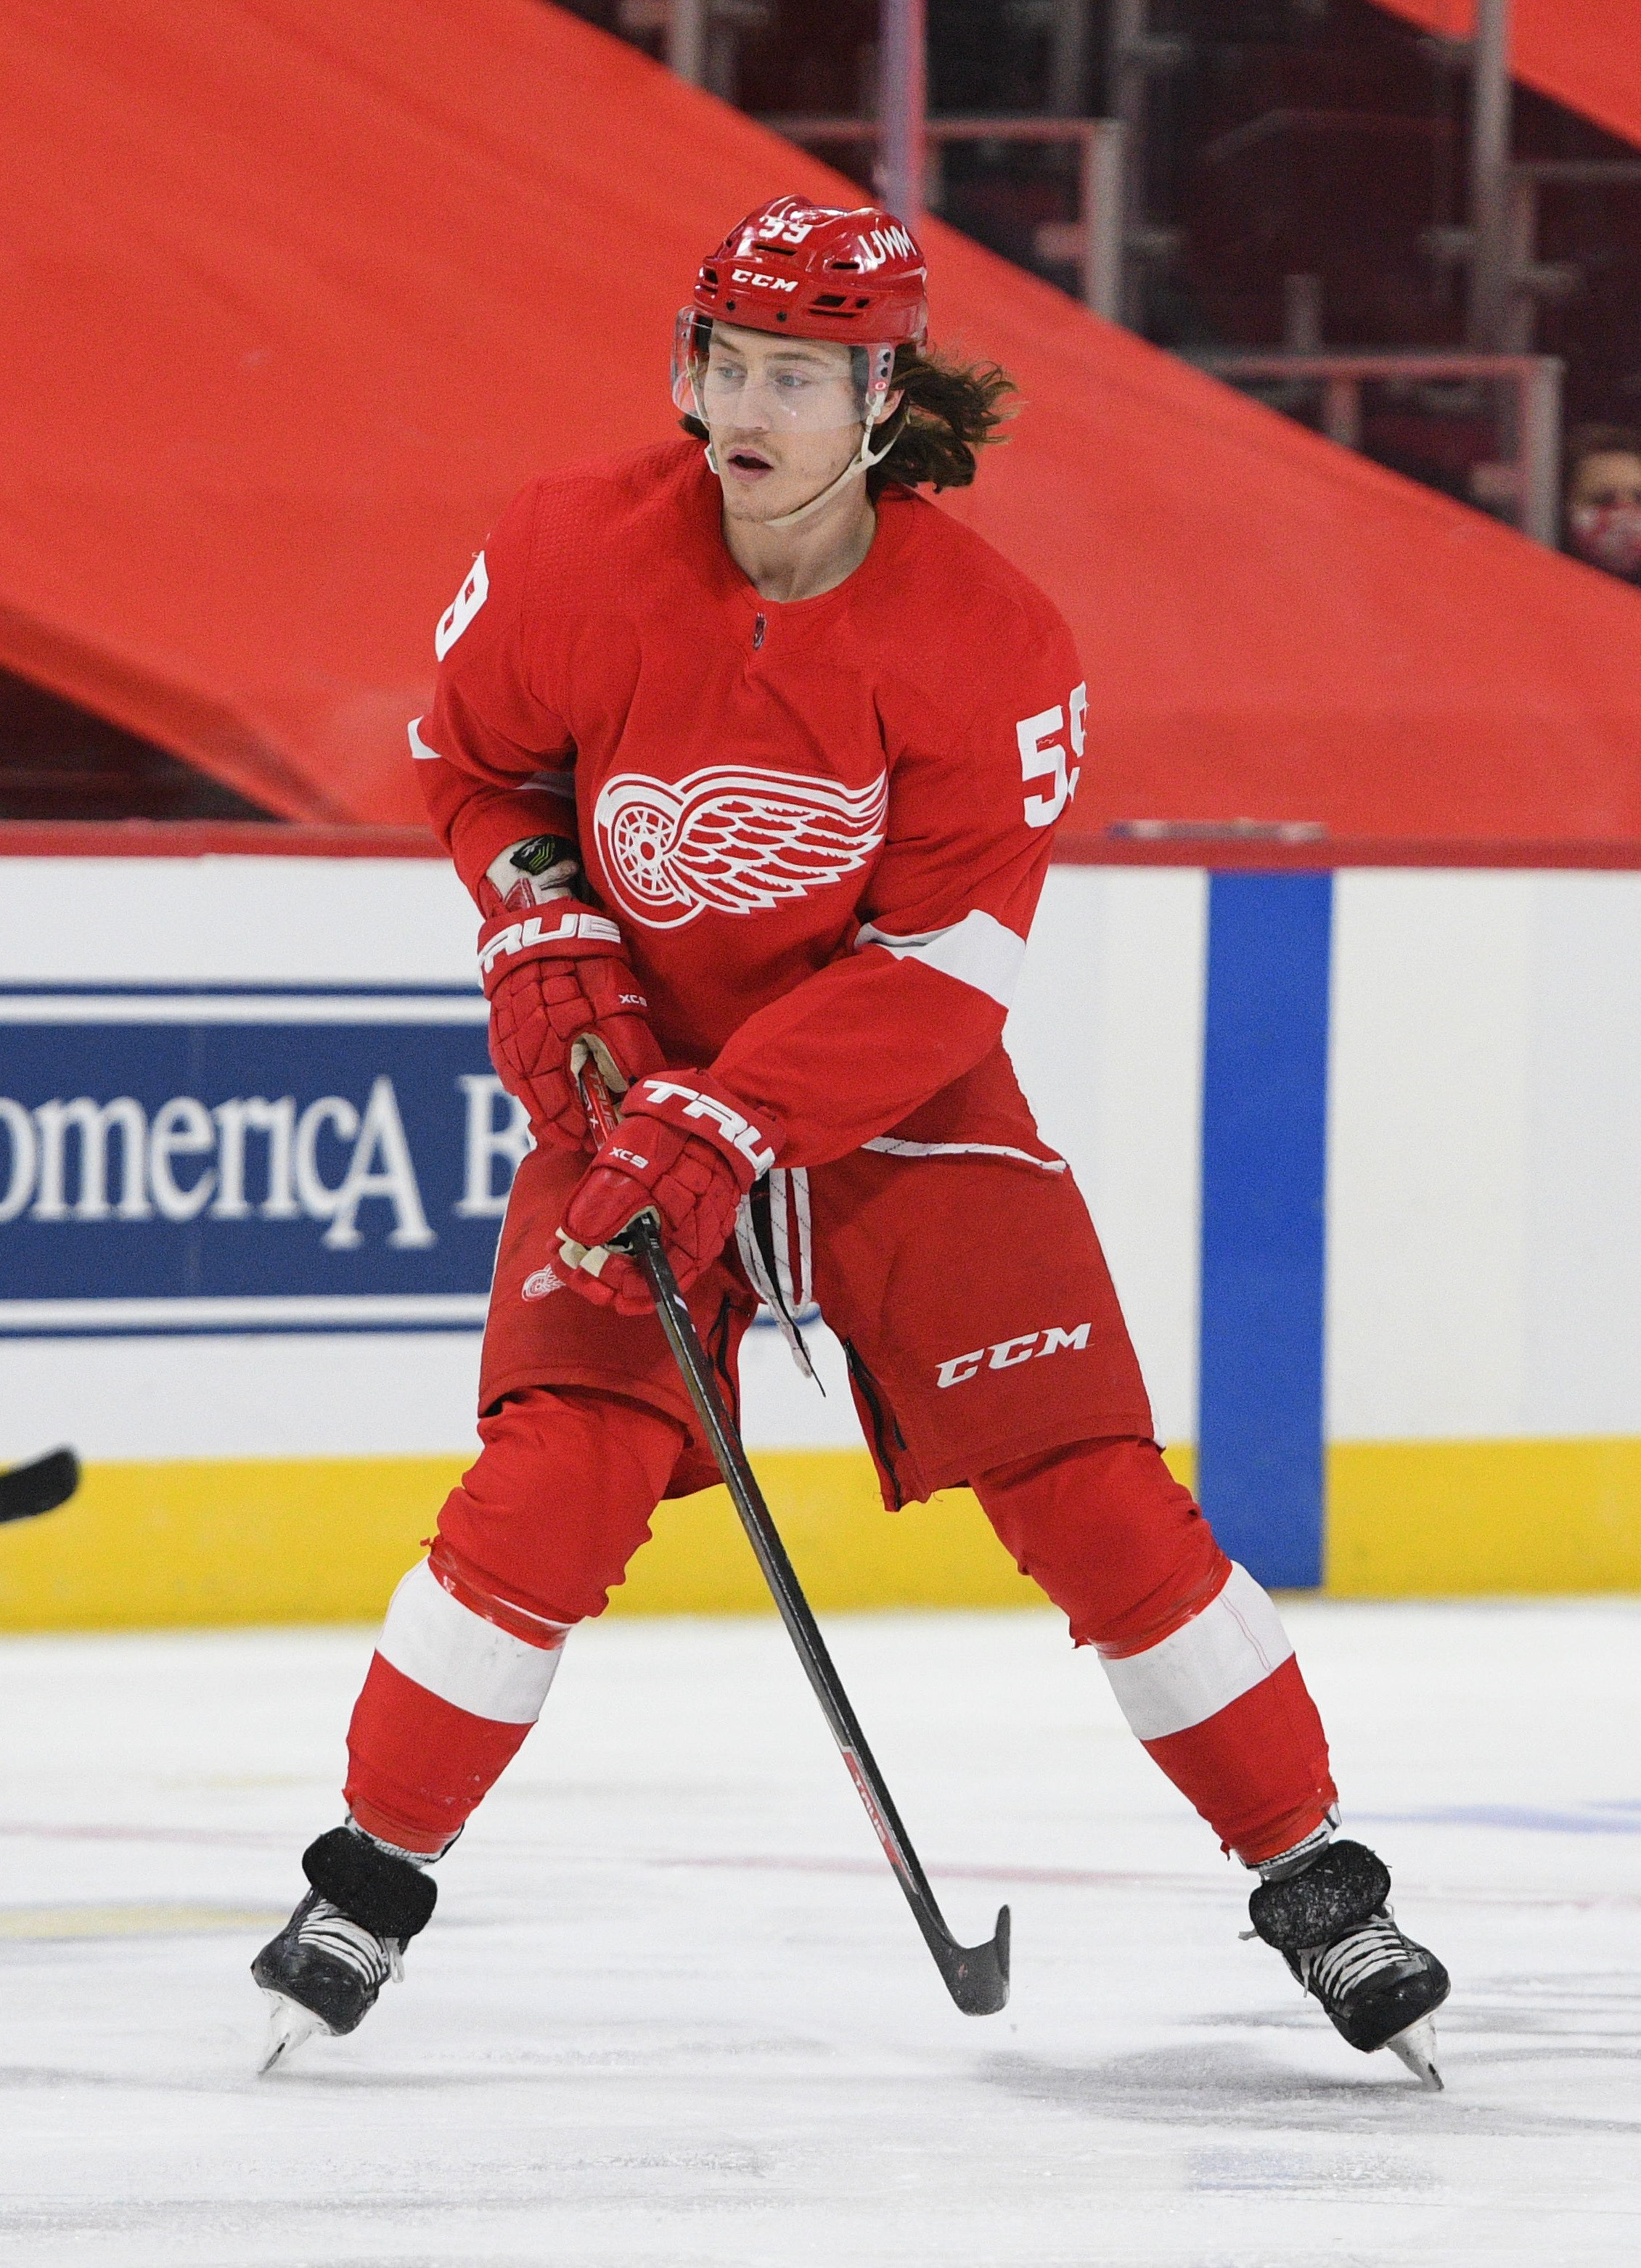 Tyler Bertuzzi is one-of-a-kind, whether he remains a Bruin or not